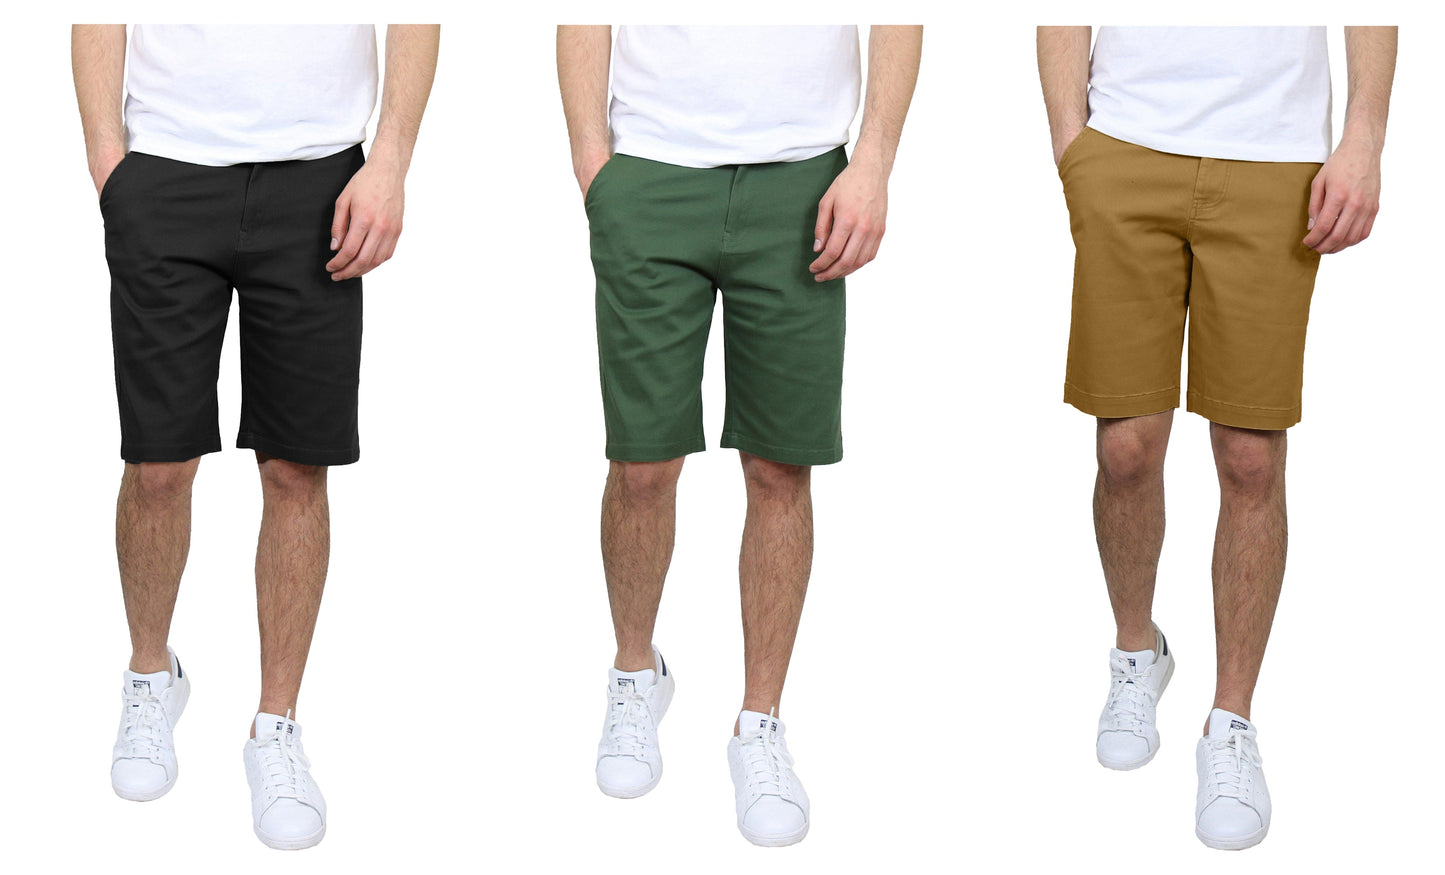 Men's 3-Pack Flat-Front Slim Fit Cotton Stretch Chino Shorts (Sizes, 30-42)